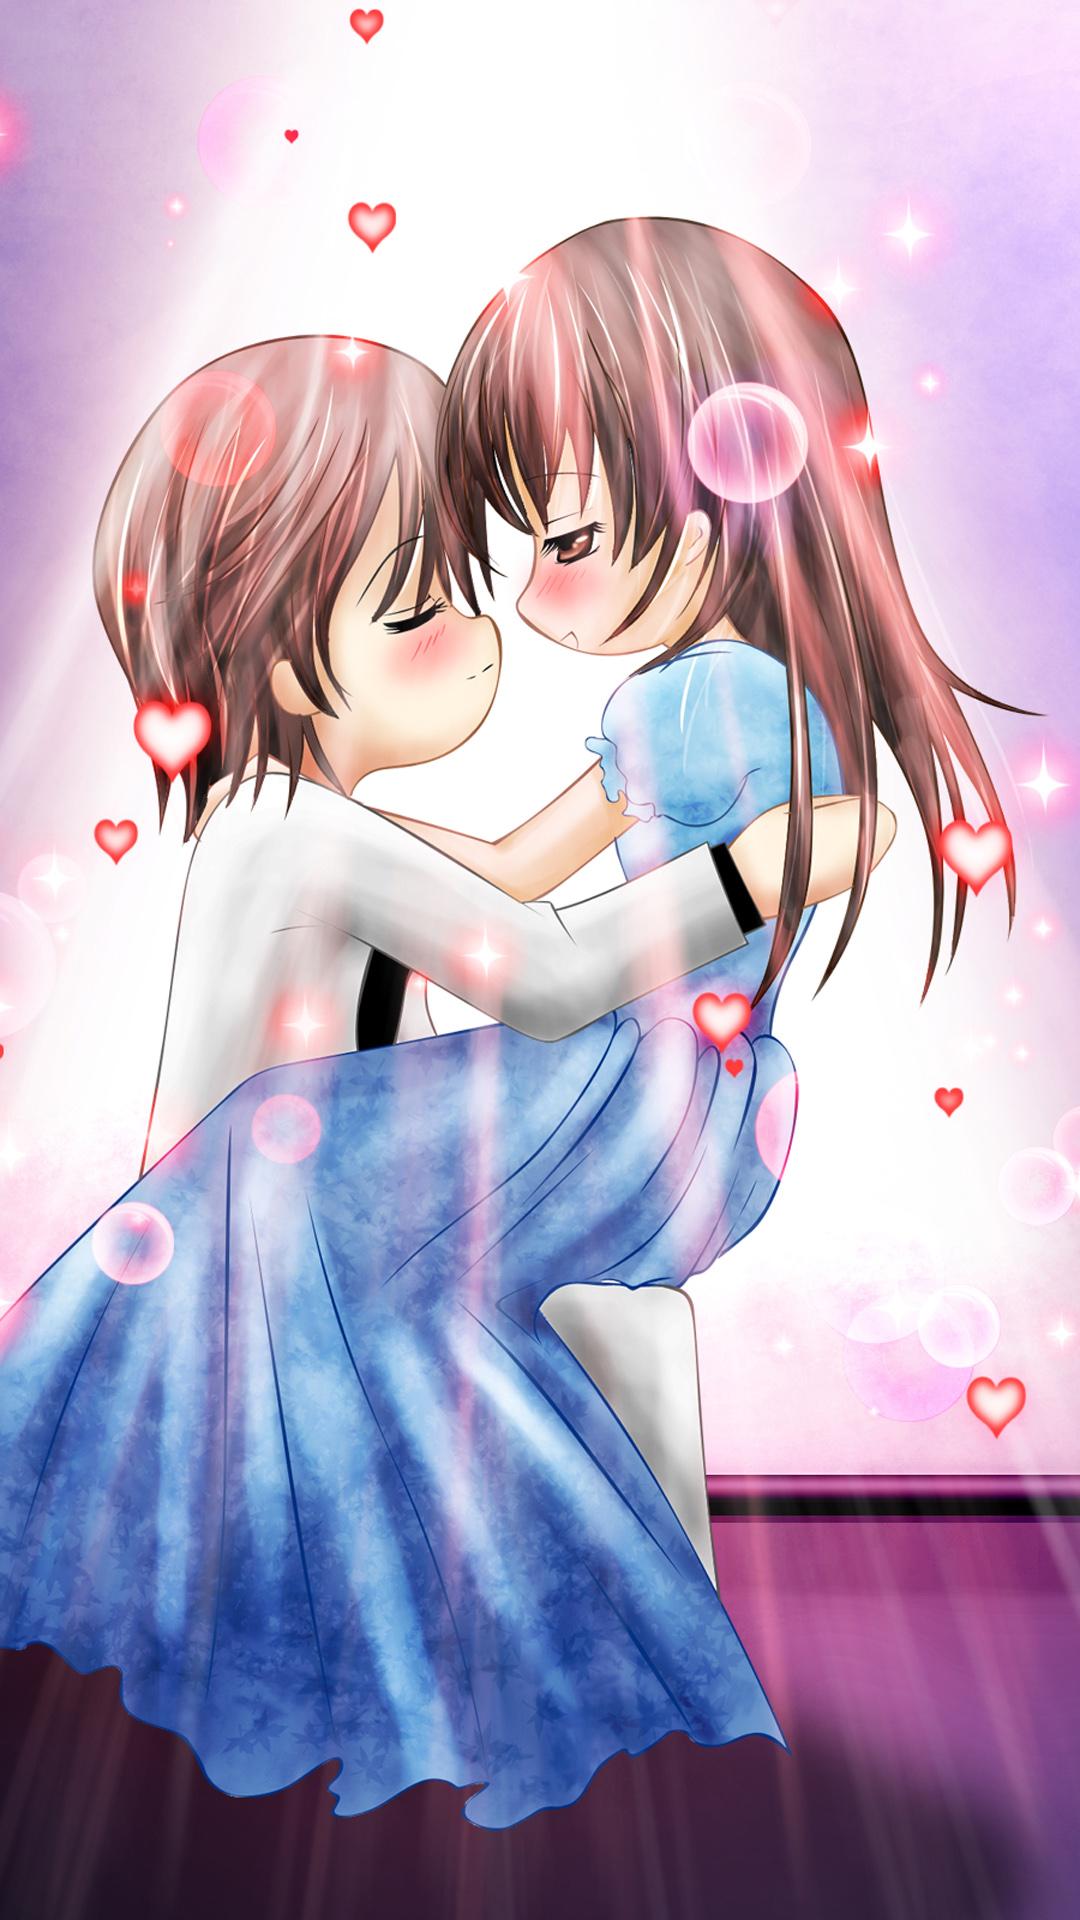 Anime Kiss Iphone Wallpapers Wallpaper Cave